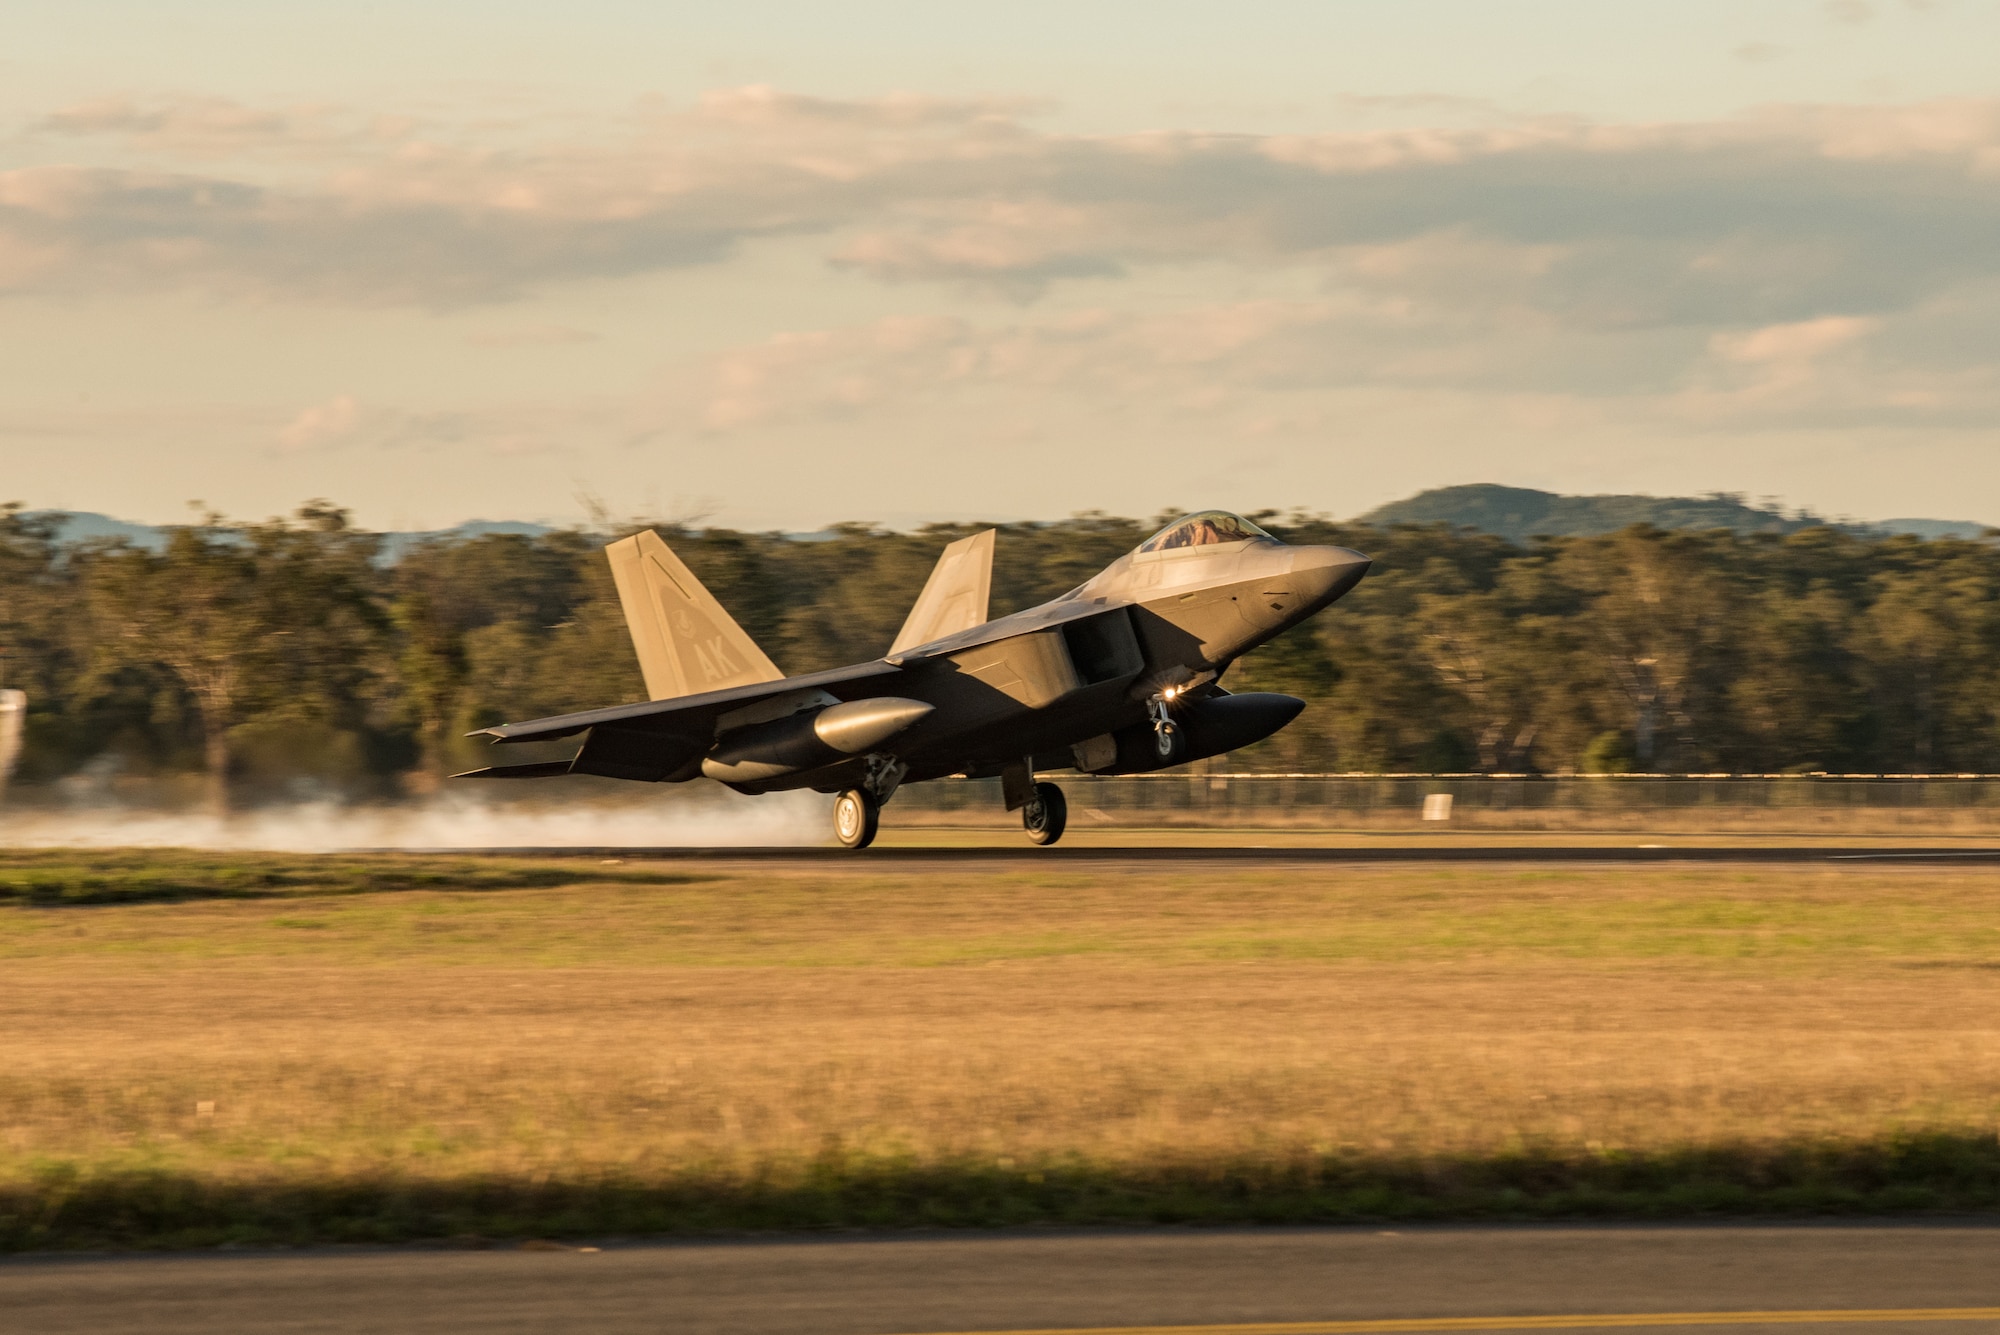 An F-22 Raptor assigned to the 90th Fighter Squadron, Joint Base Elmendorf-Richardson, Alaska, lands at Royal Australian Air Force Base Amberley for Talisman Sabre 19, July 9. The month-long exercise involves the U.S. and Australian forces, and is designed to improve combat training, readiness and interoperability. (U.S. Air Force photo by Staff Sgt. Kyle Johnson)